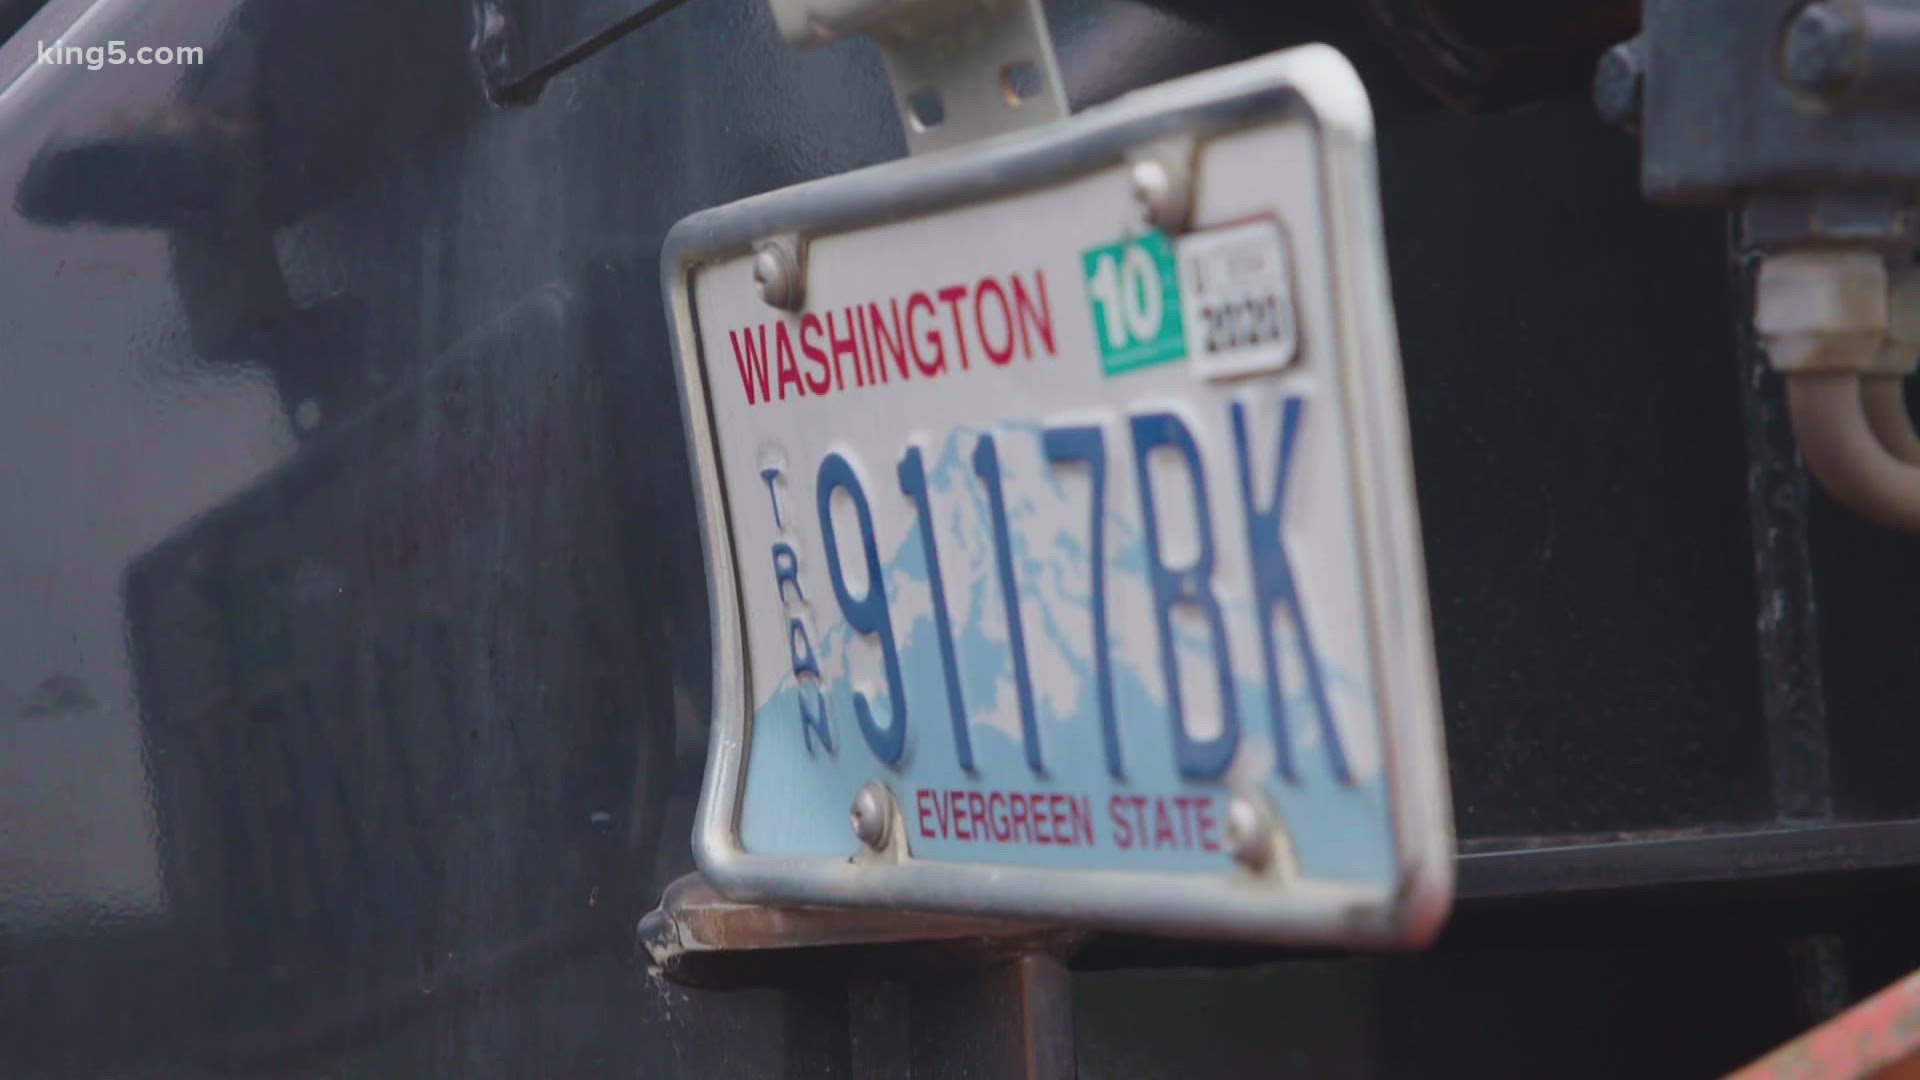 Washington state front license plate in window